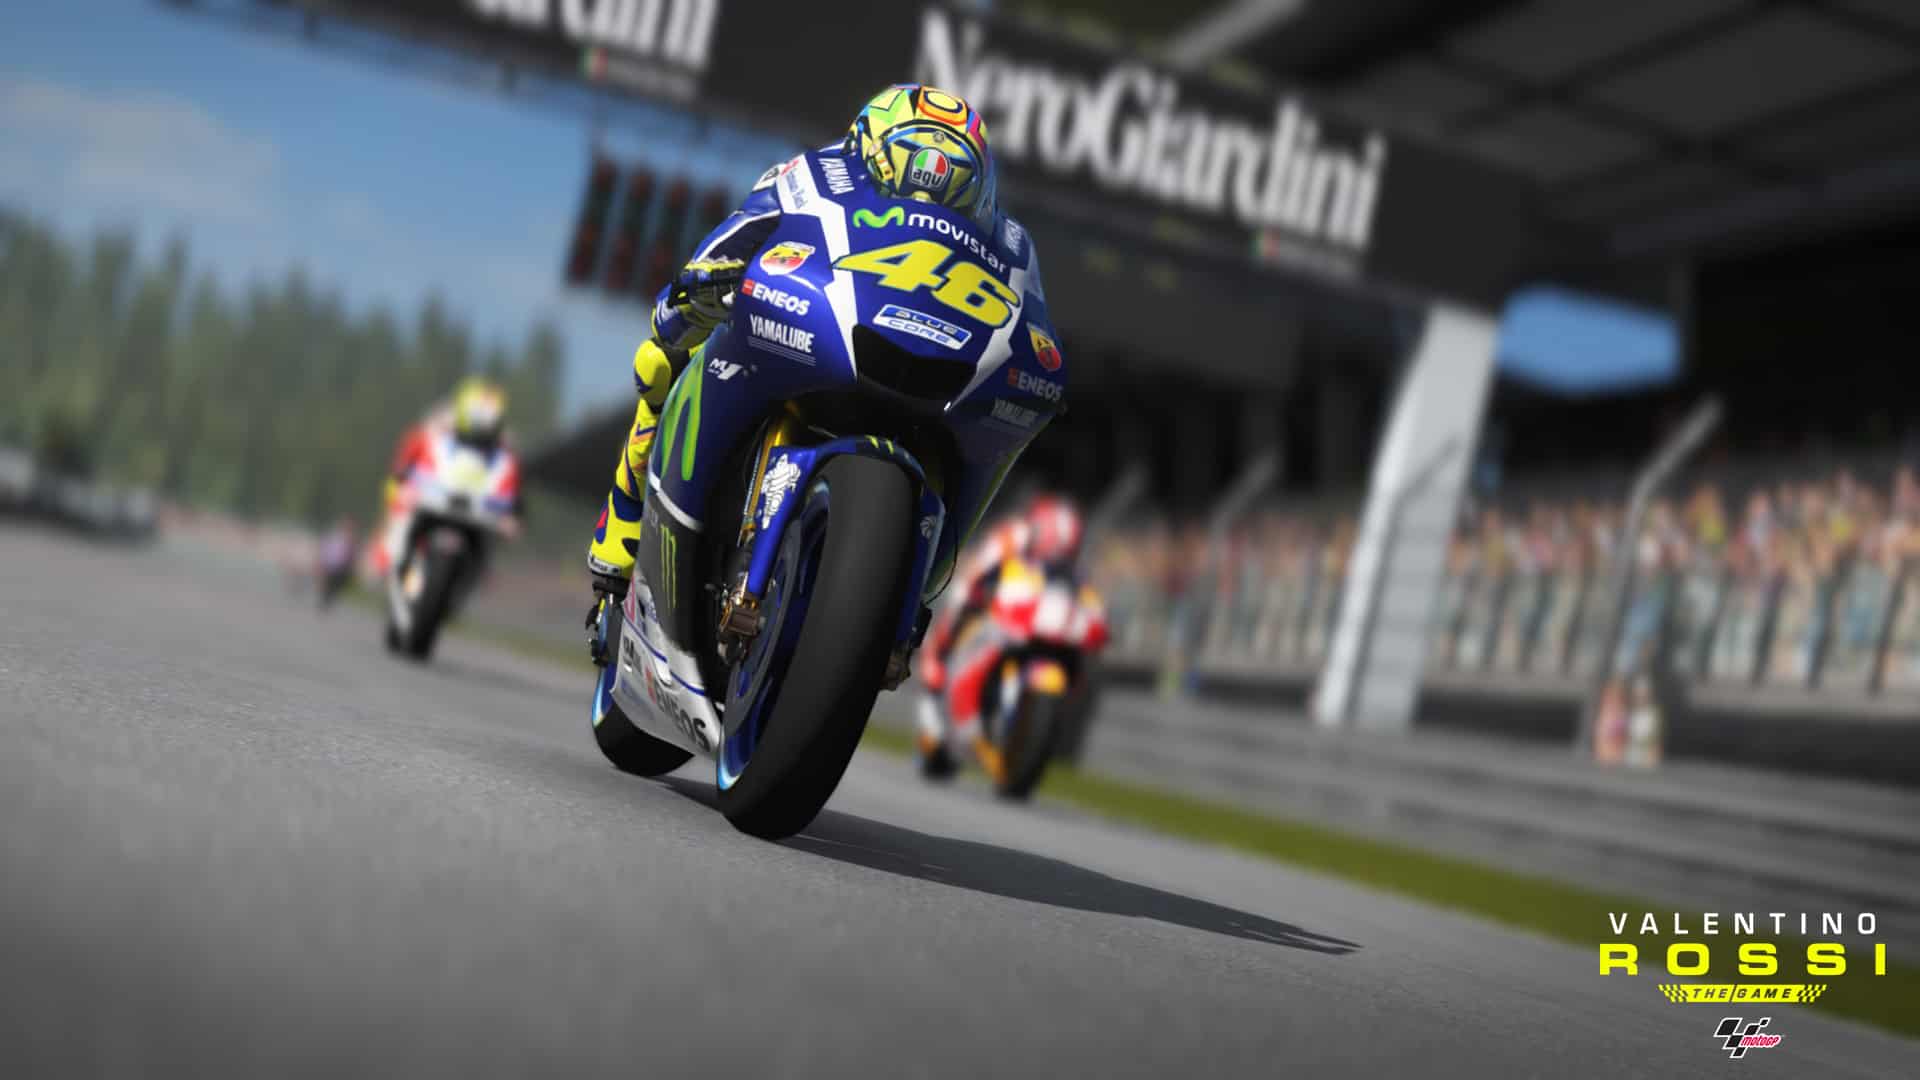 Five years later, Valentino Rossi: The Game still has plenty to offer